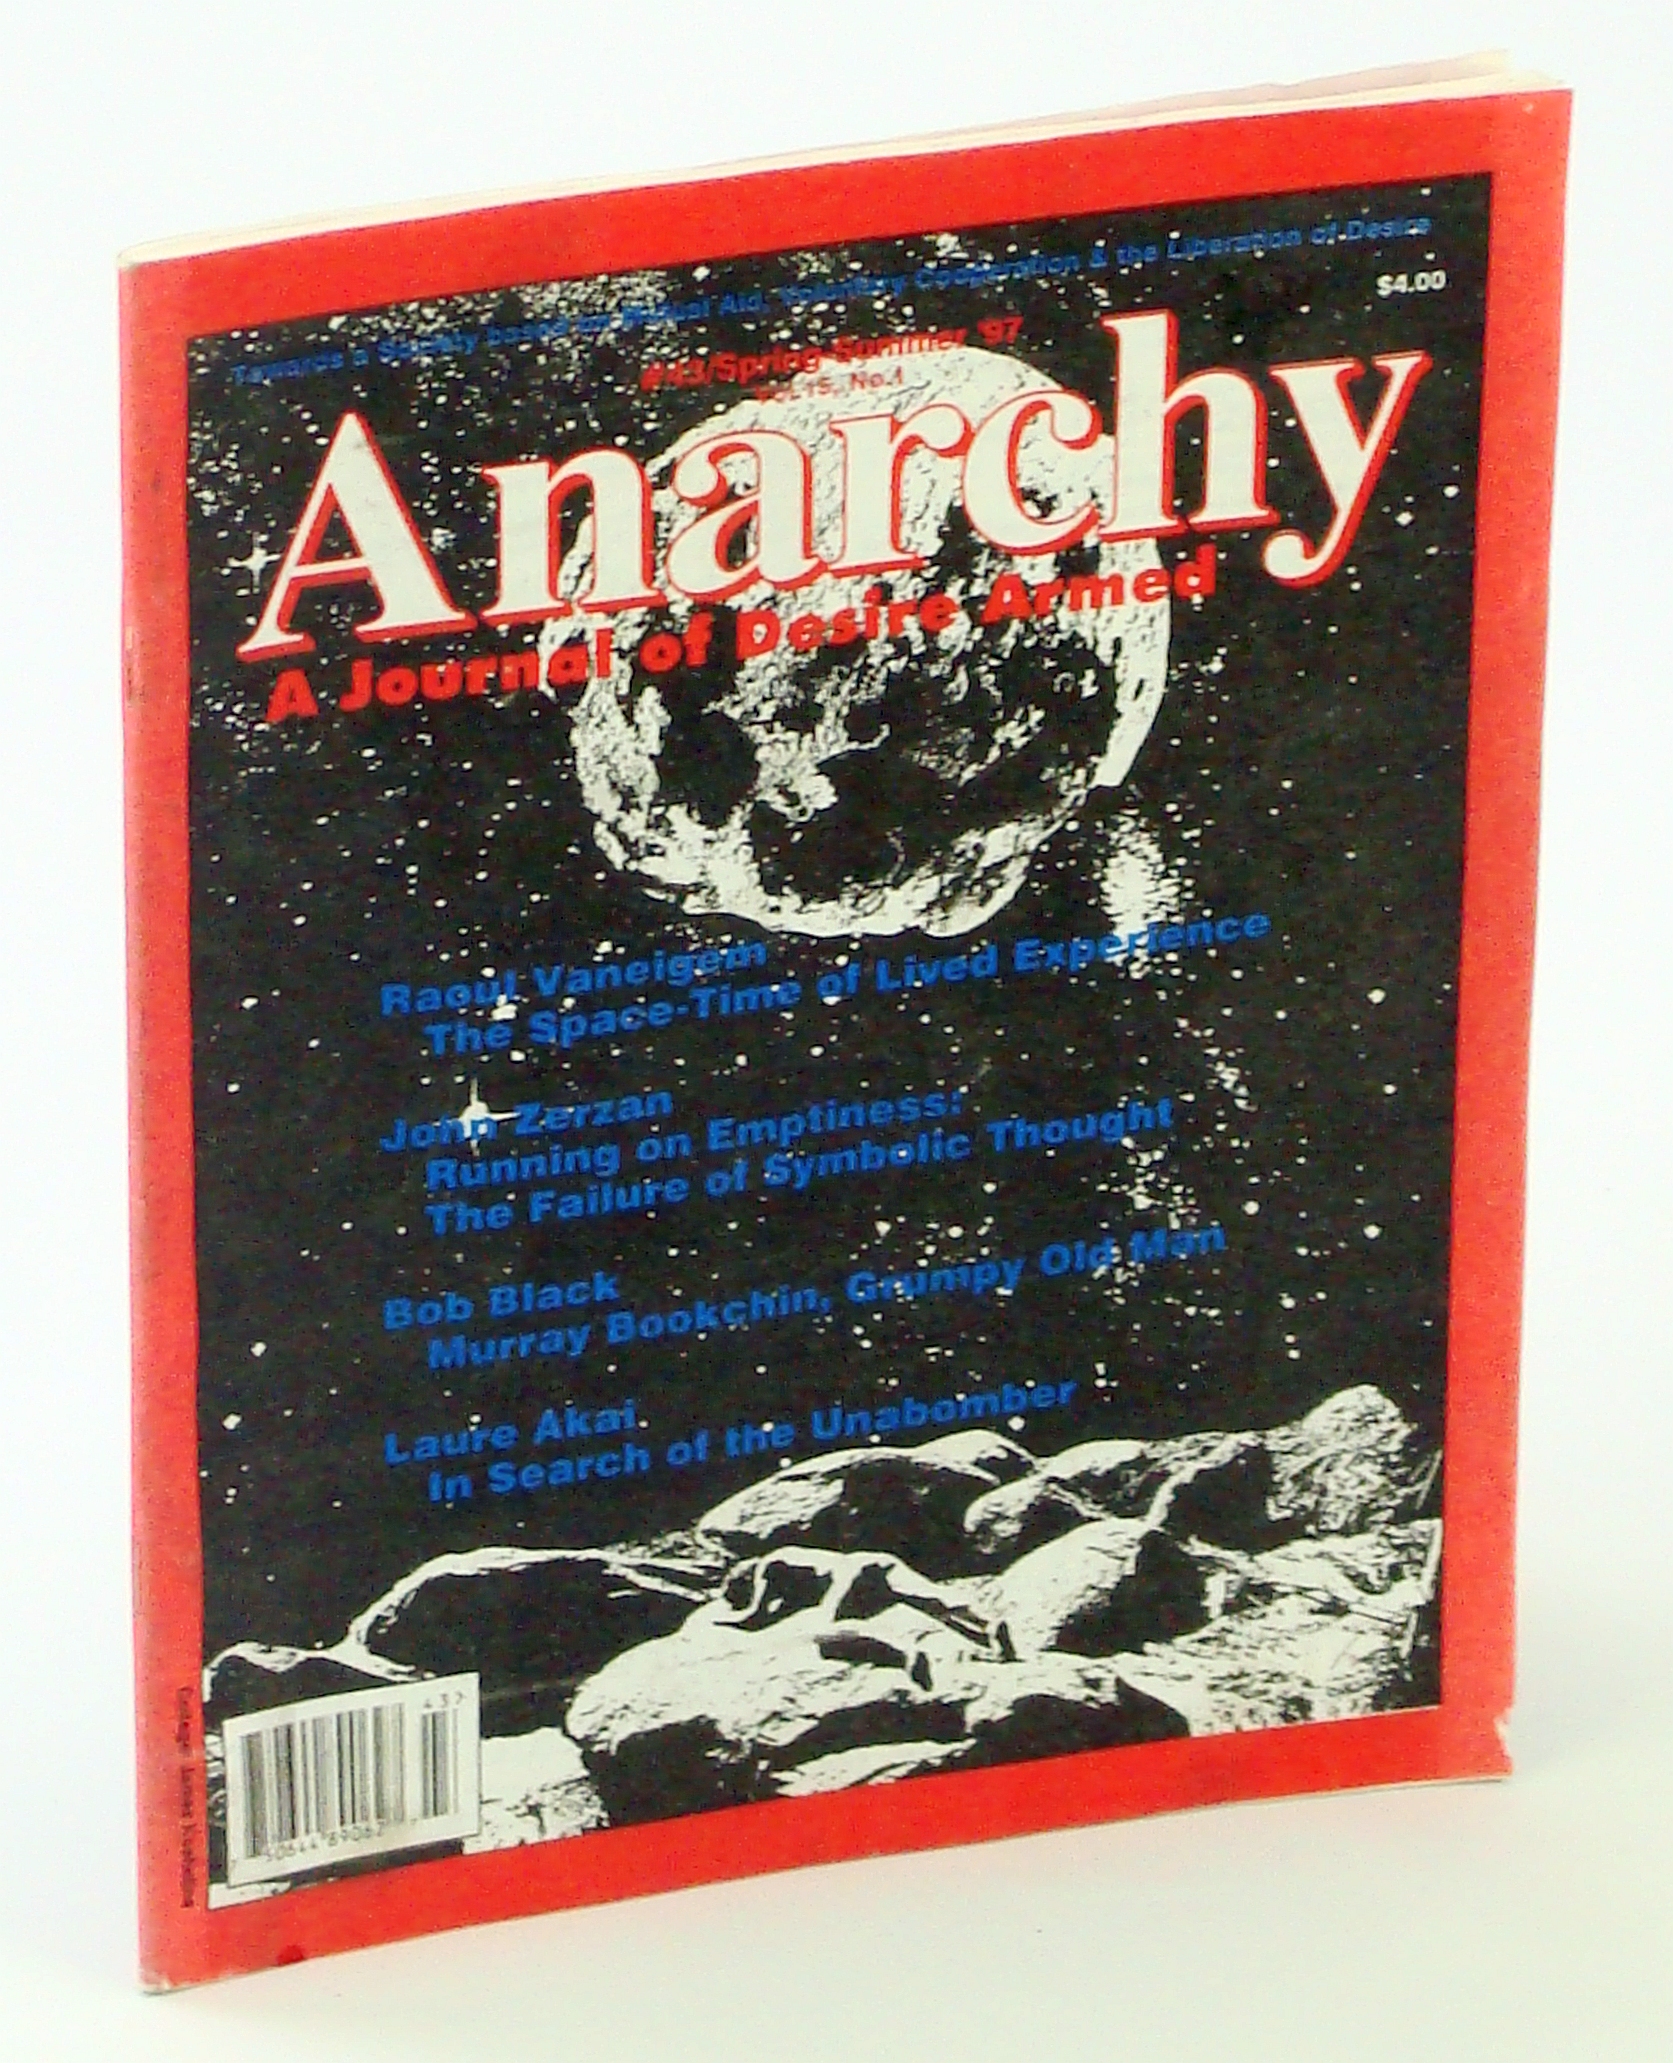 Image for Anarchy [Magazine] A Journal of Desire Armed, #43, Spring - Summer '97 [1997] Vol 15, No. 1 - The Space-Time of Lived Experience